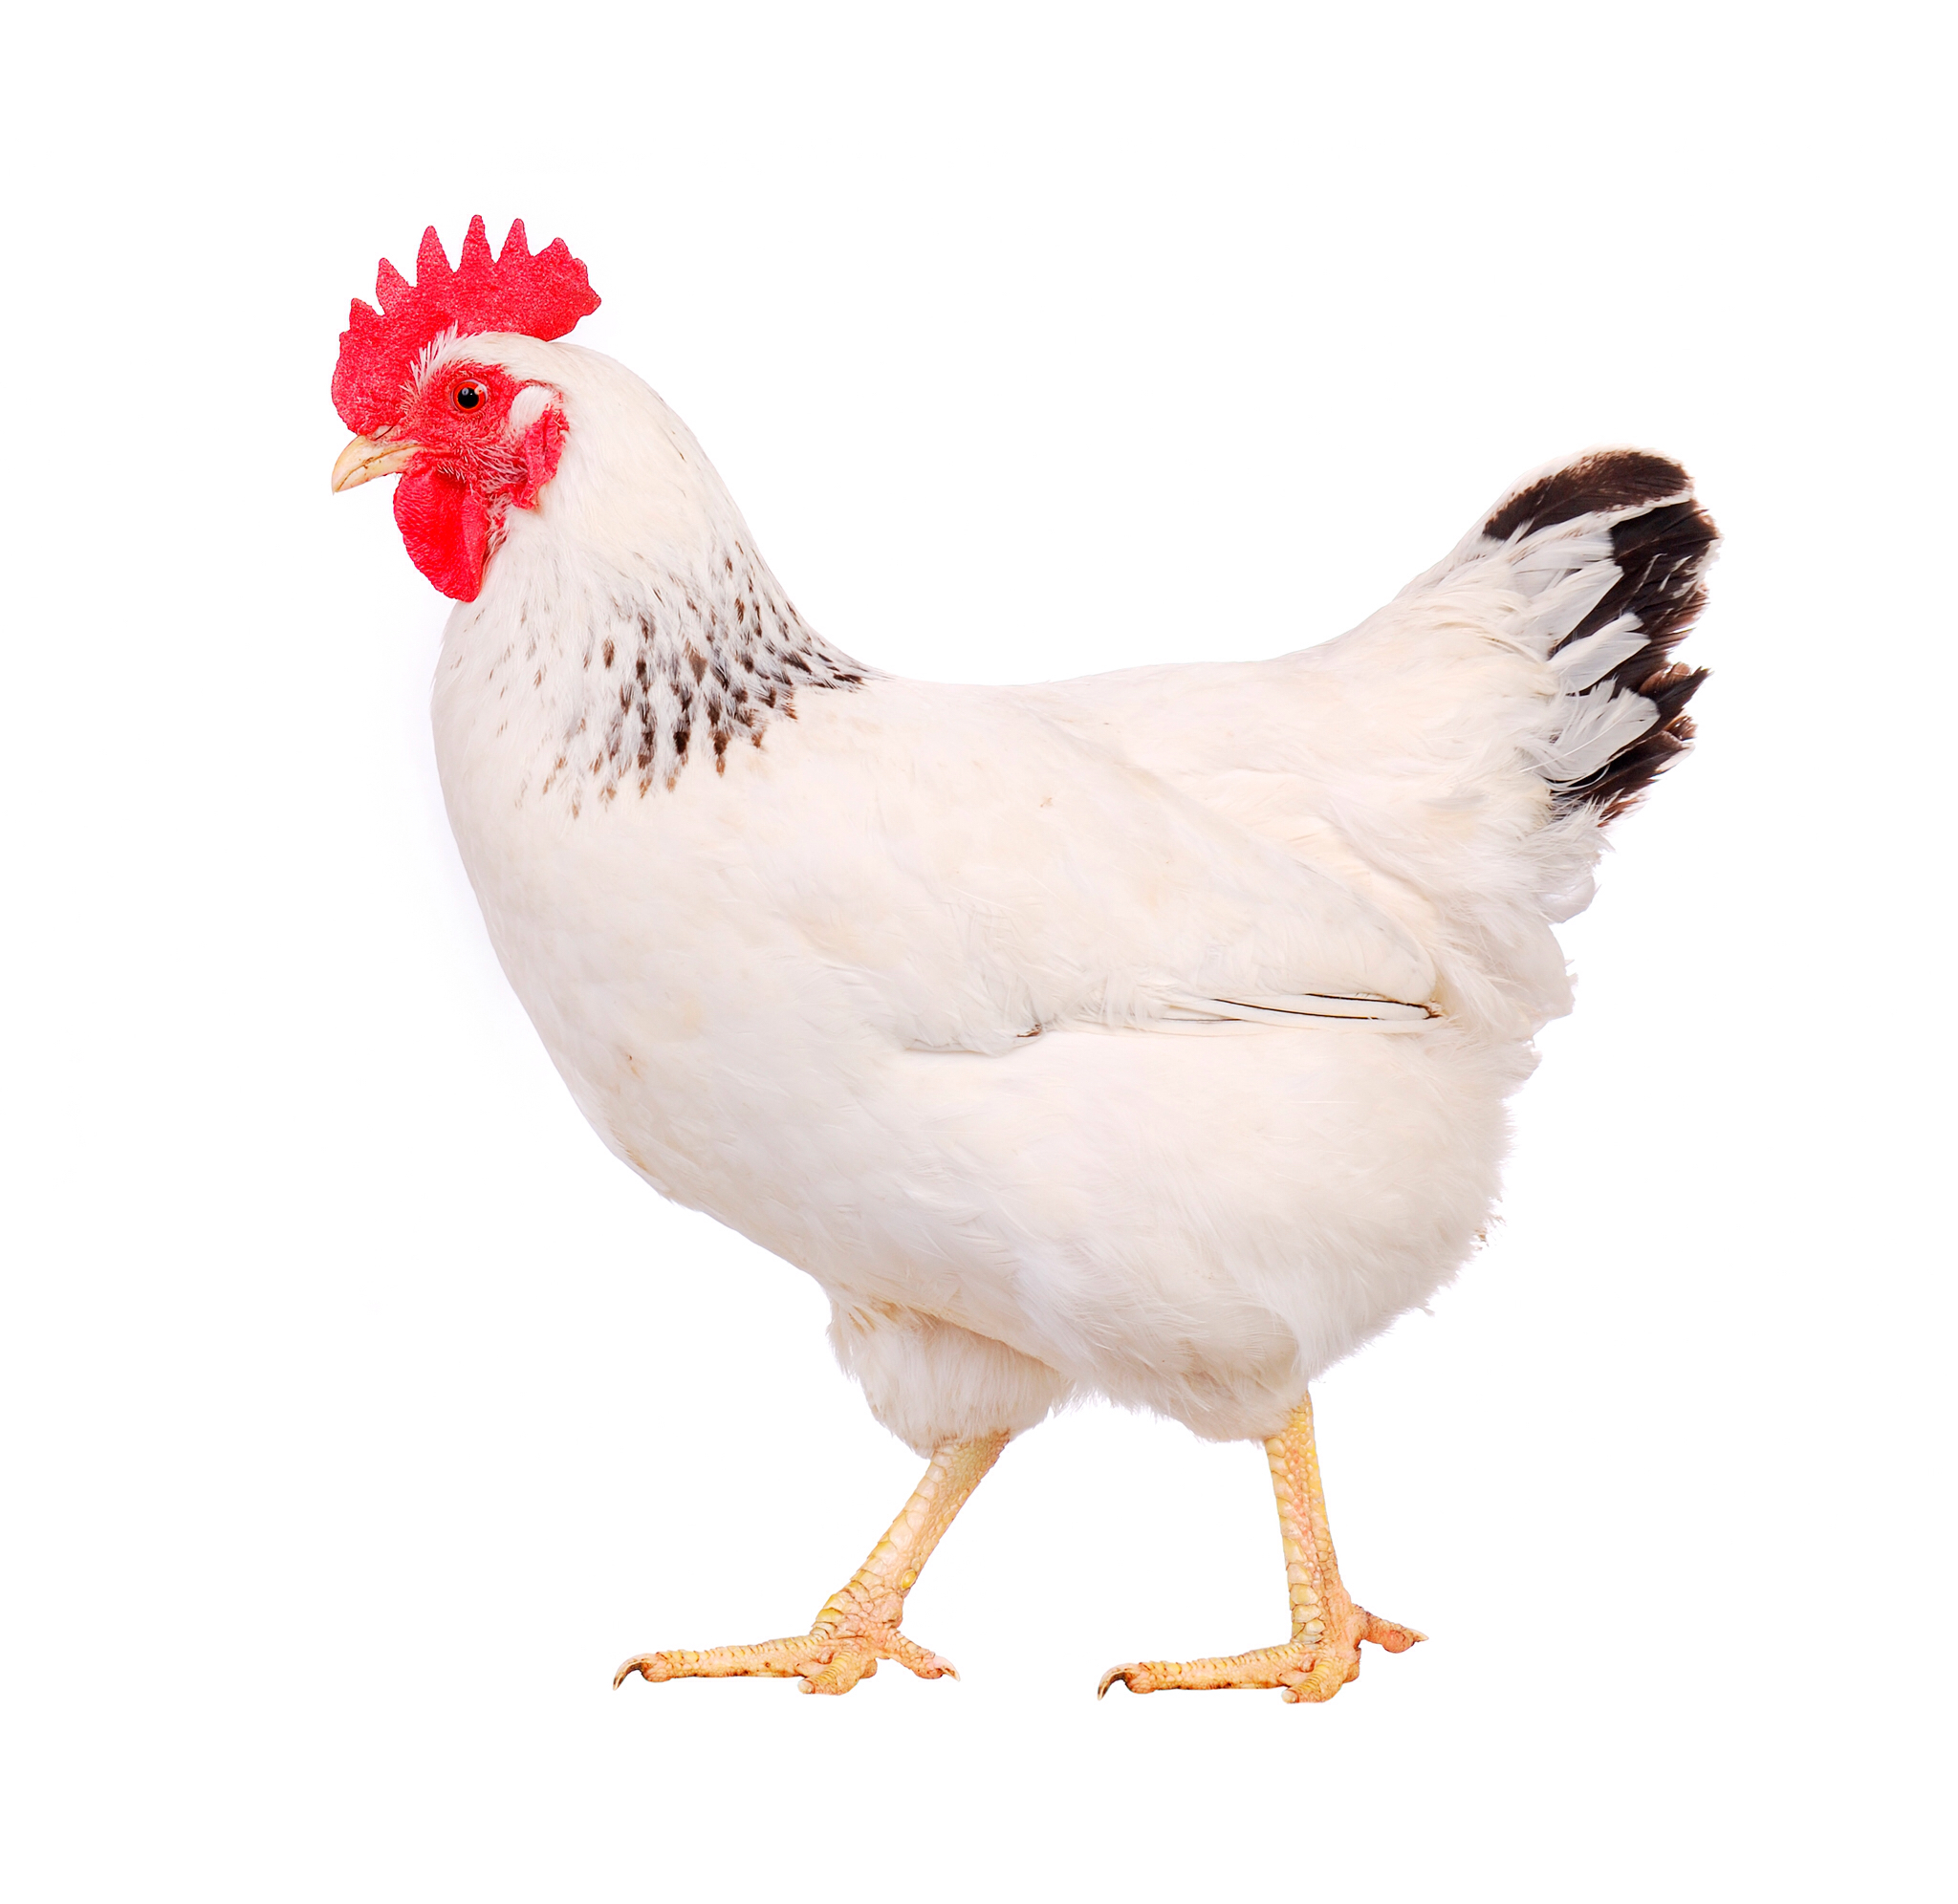 Chicken Png Image. Image From Http://discovermagazine Pluspng Pluspng Pluspng.com/~/media/ - Chicken, Transparent background PNG HD thumbnail